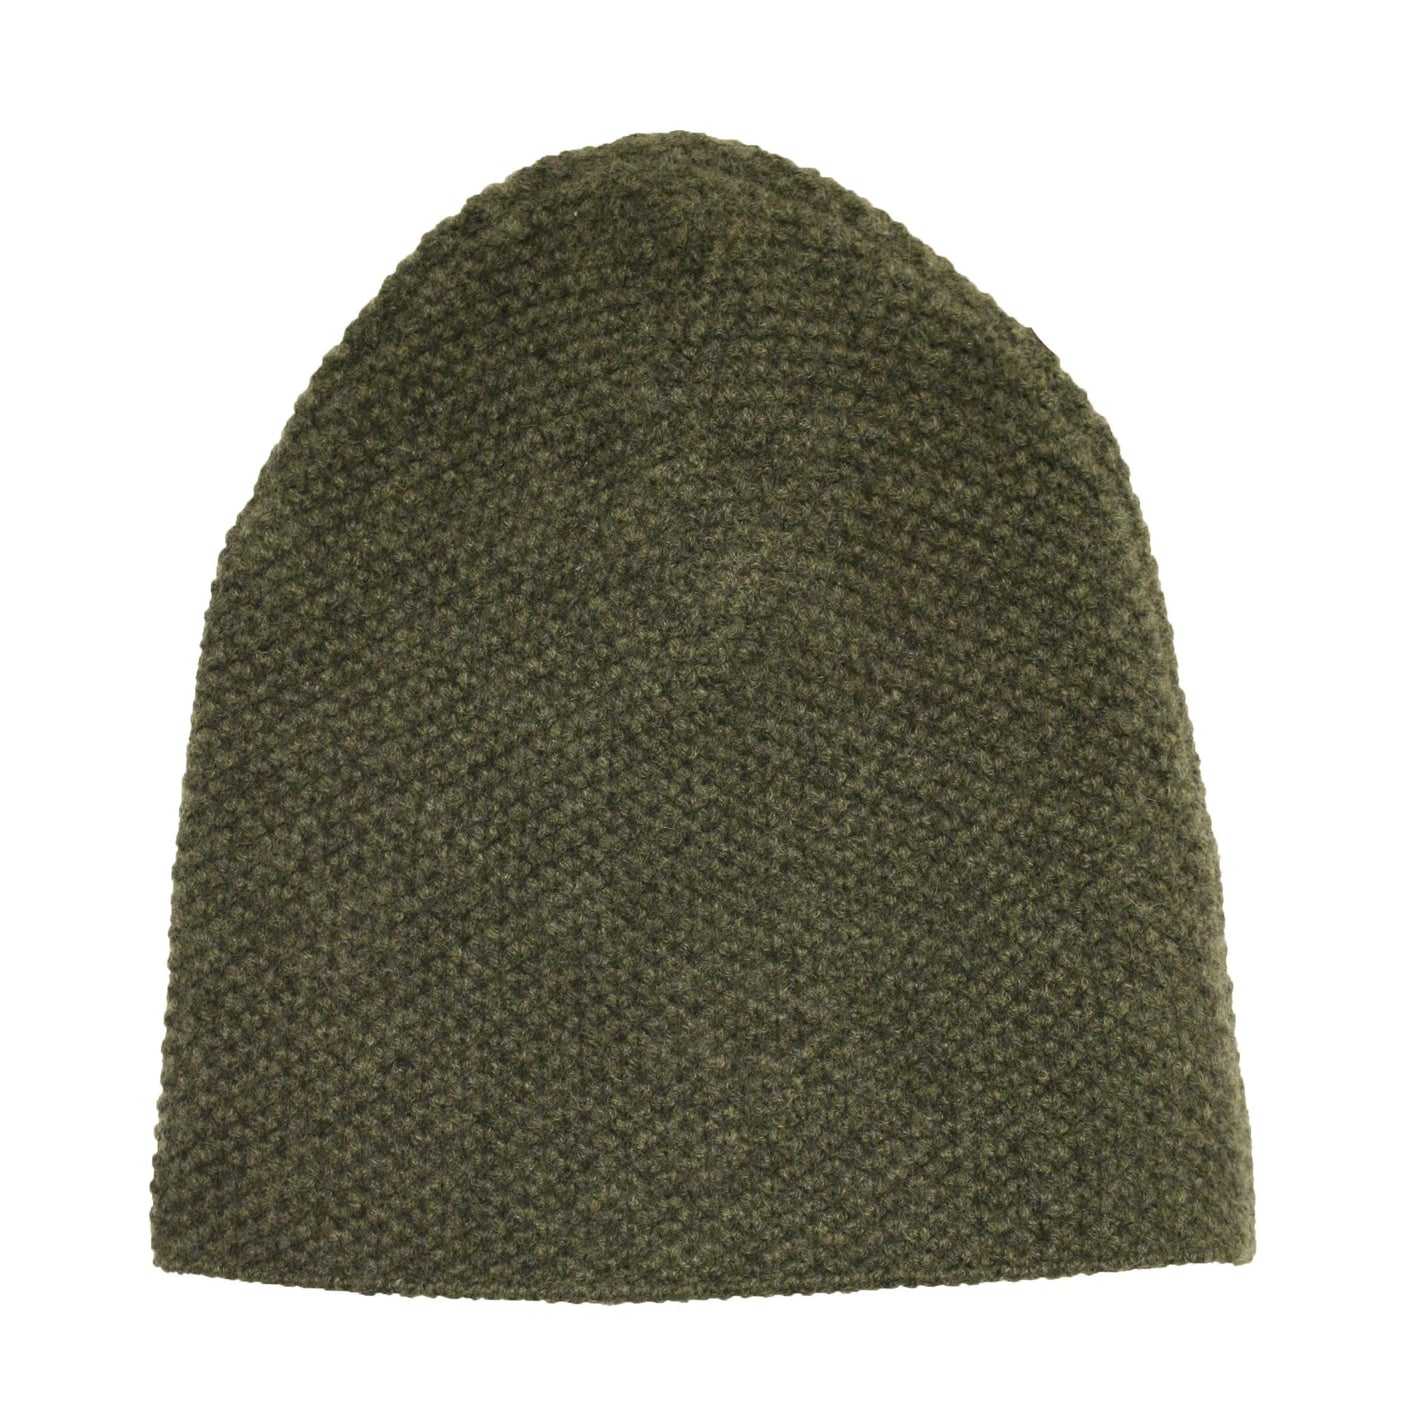 Heavy Seed stitch knitted Cashmere Beanie Soldeu Army Green - Drakoi Marketplace